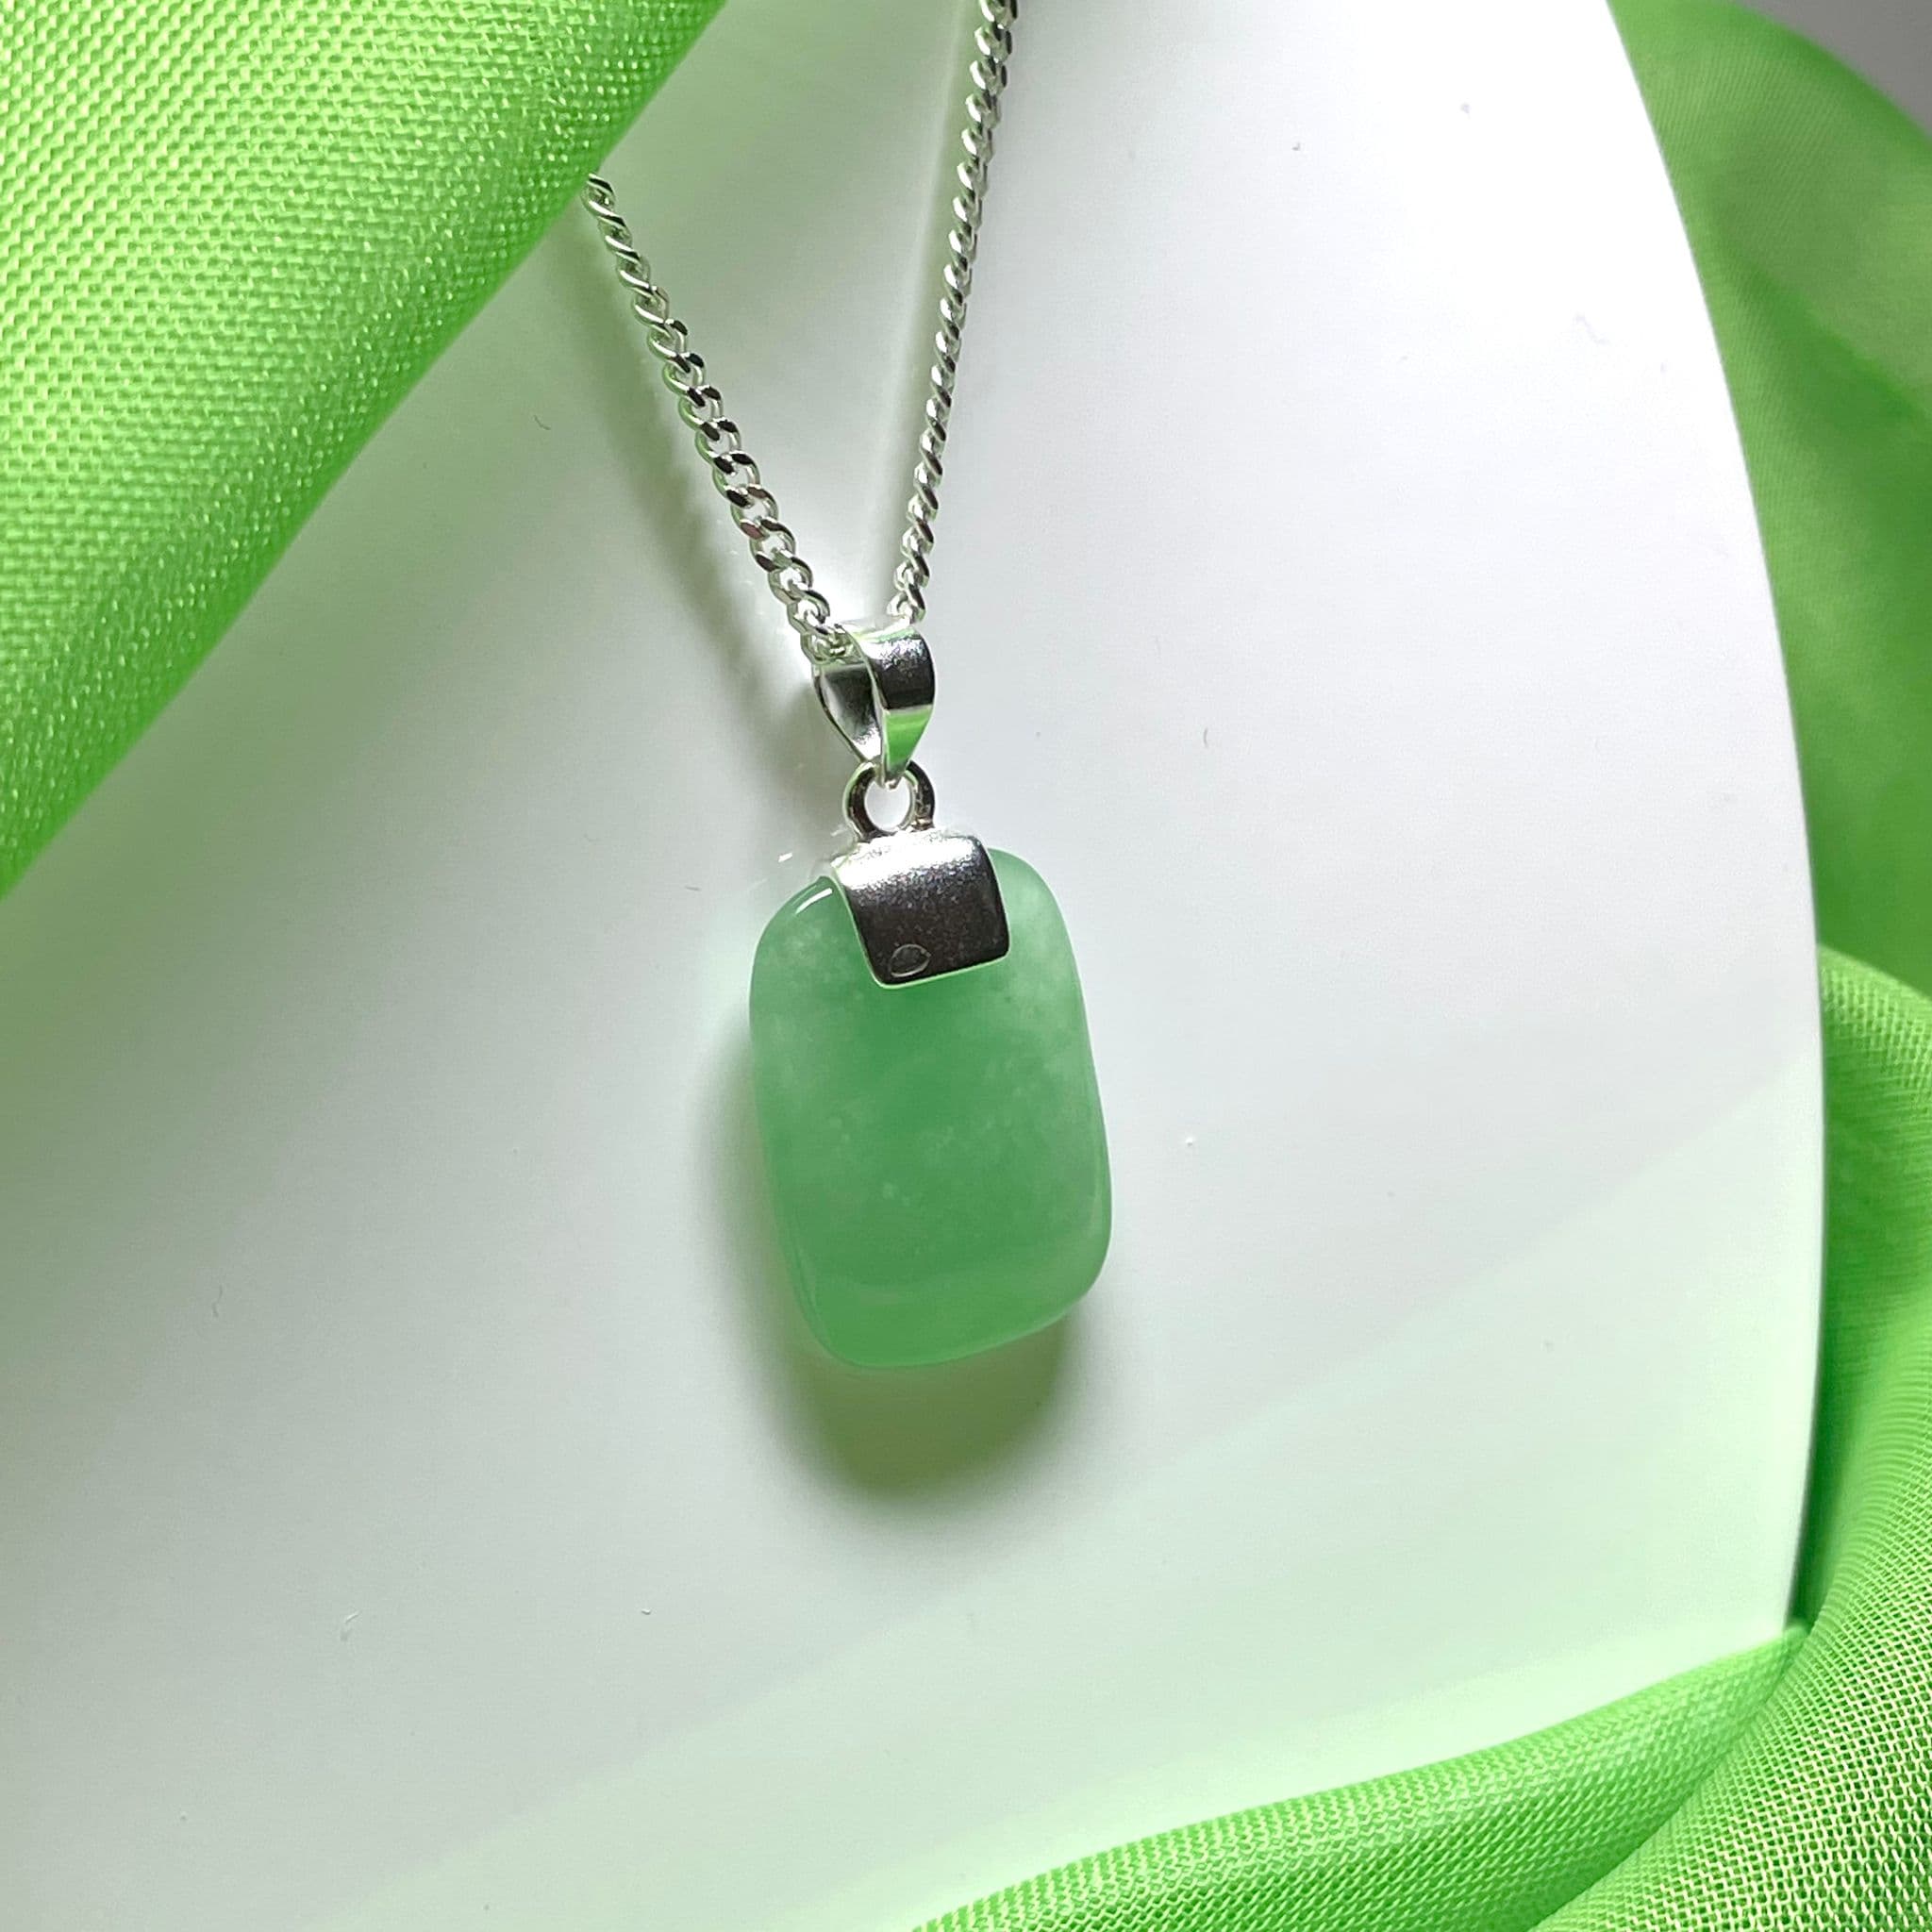 Buy Elegant jade green marble stone necklace with white pearls only on Kalki